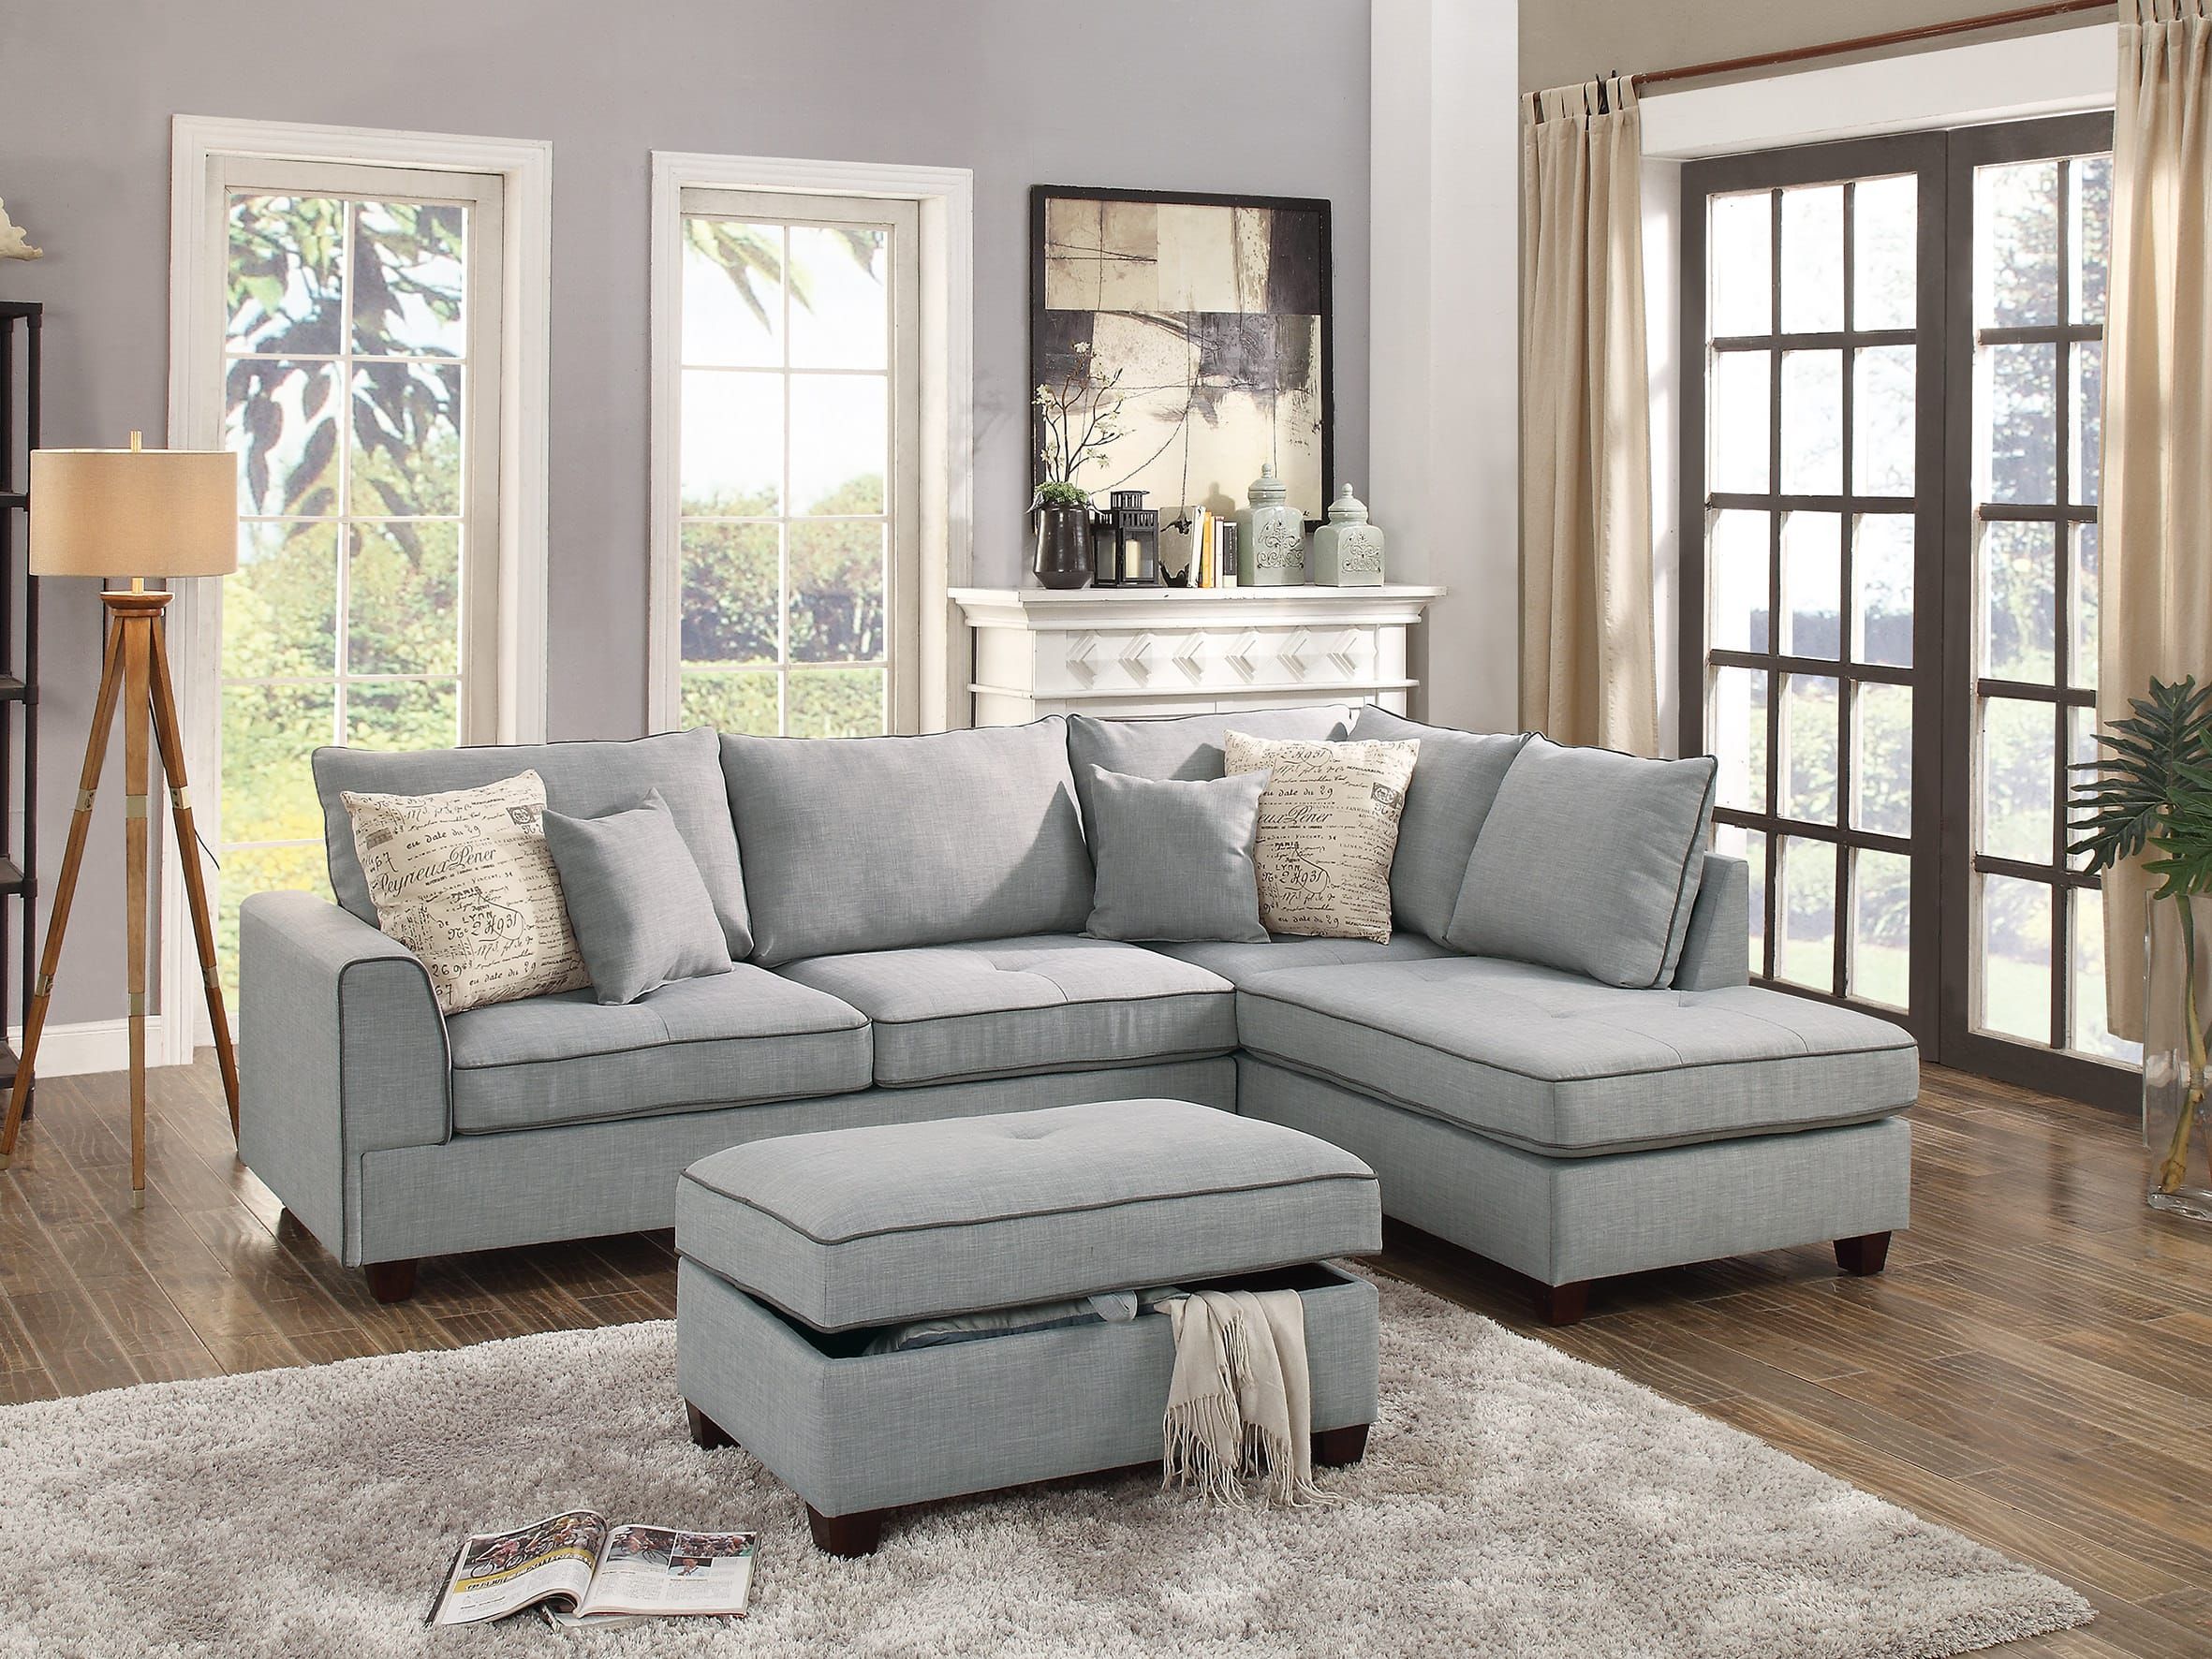 F6543 Light Gray 3 Pcs Sectional Sofa Setpoundex Within Sofas In Light Gray (Gallery 11 of 22)